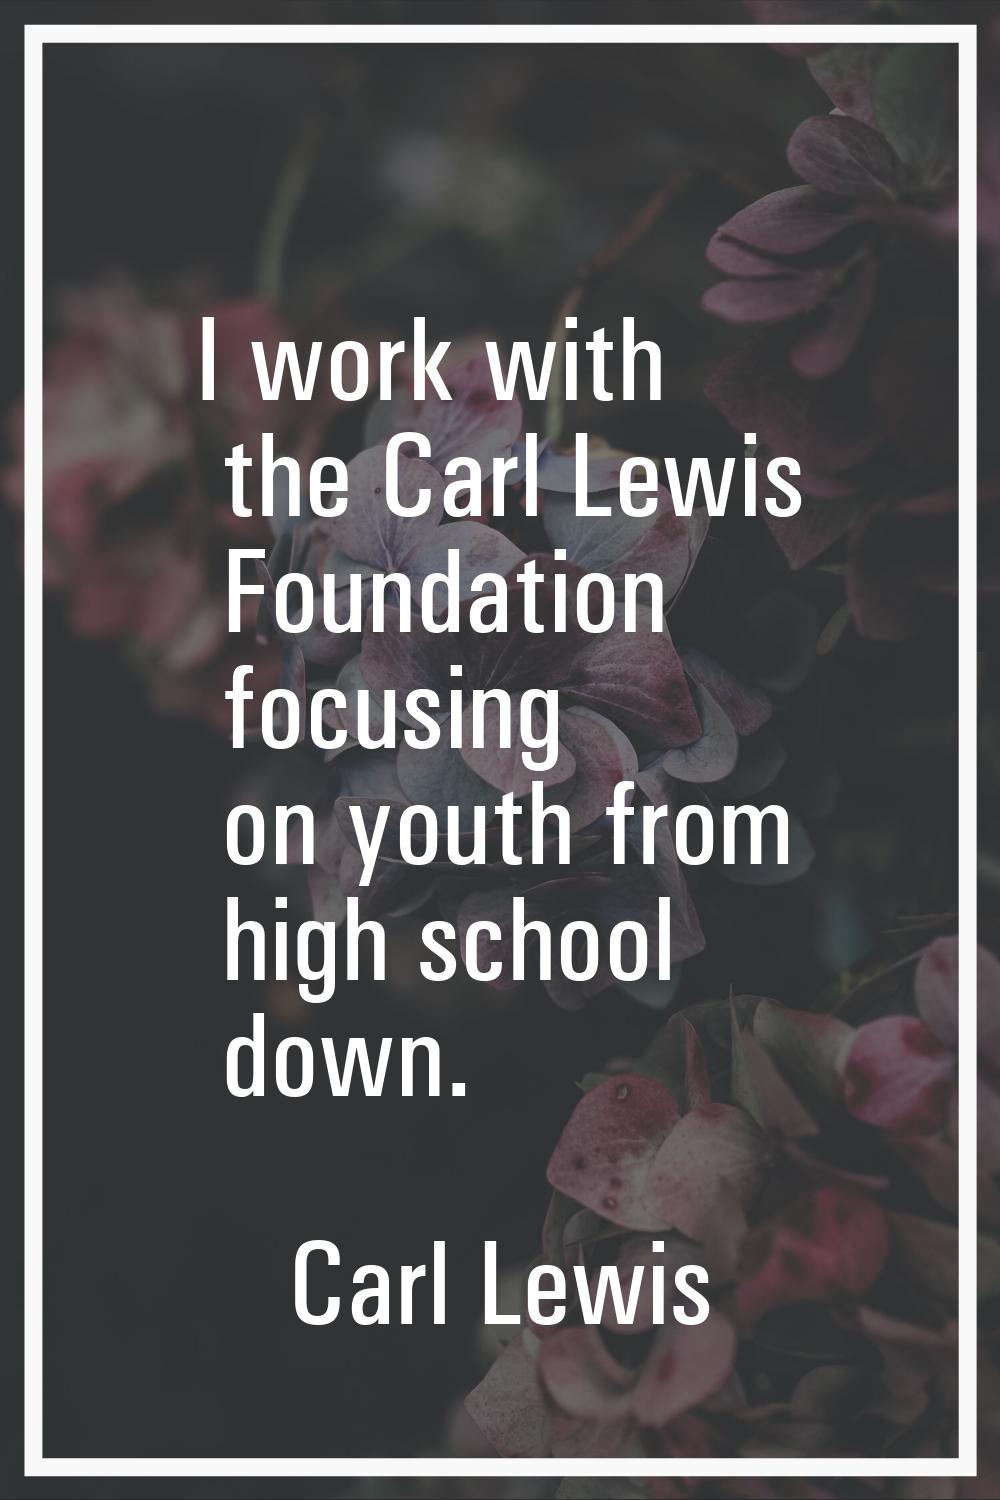 I work with the Carl Lewis Foundation focusing on youth from high school down.